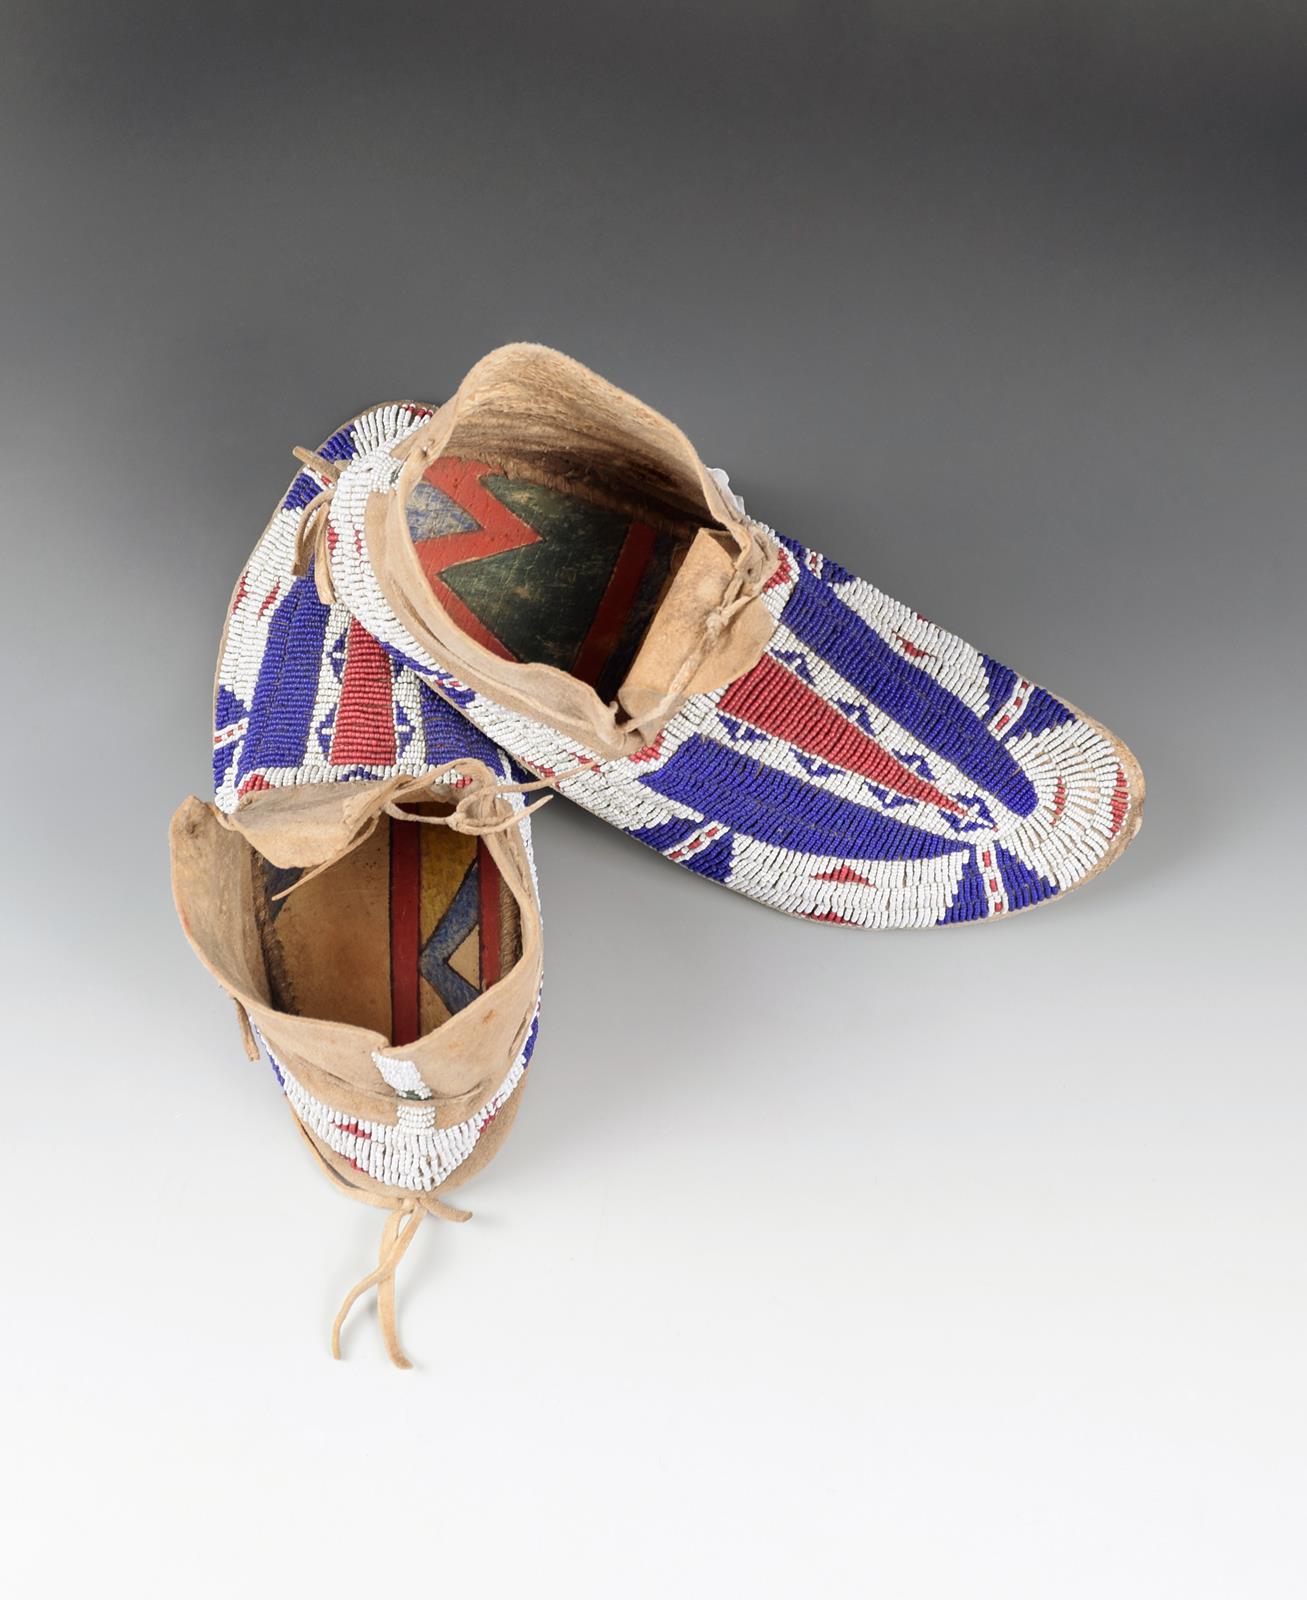 A pair of Cheyenne moccasins buckskin, coloured glass beads, fully beaded in white, red and blue,